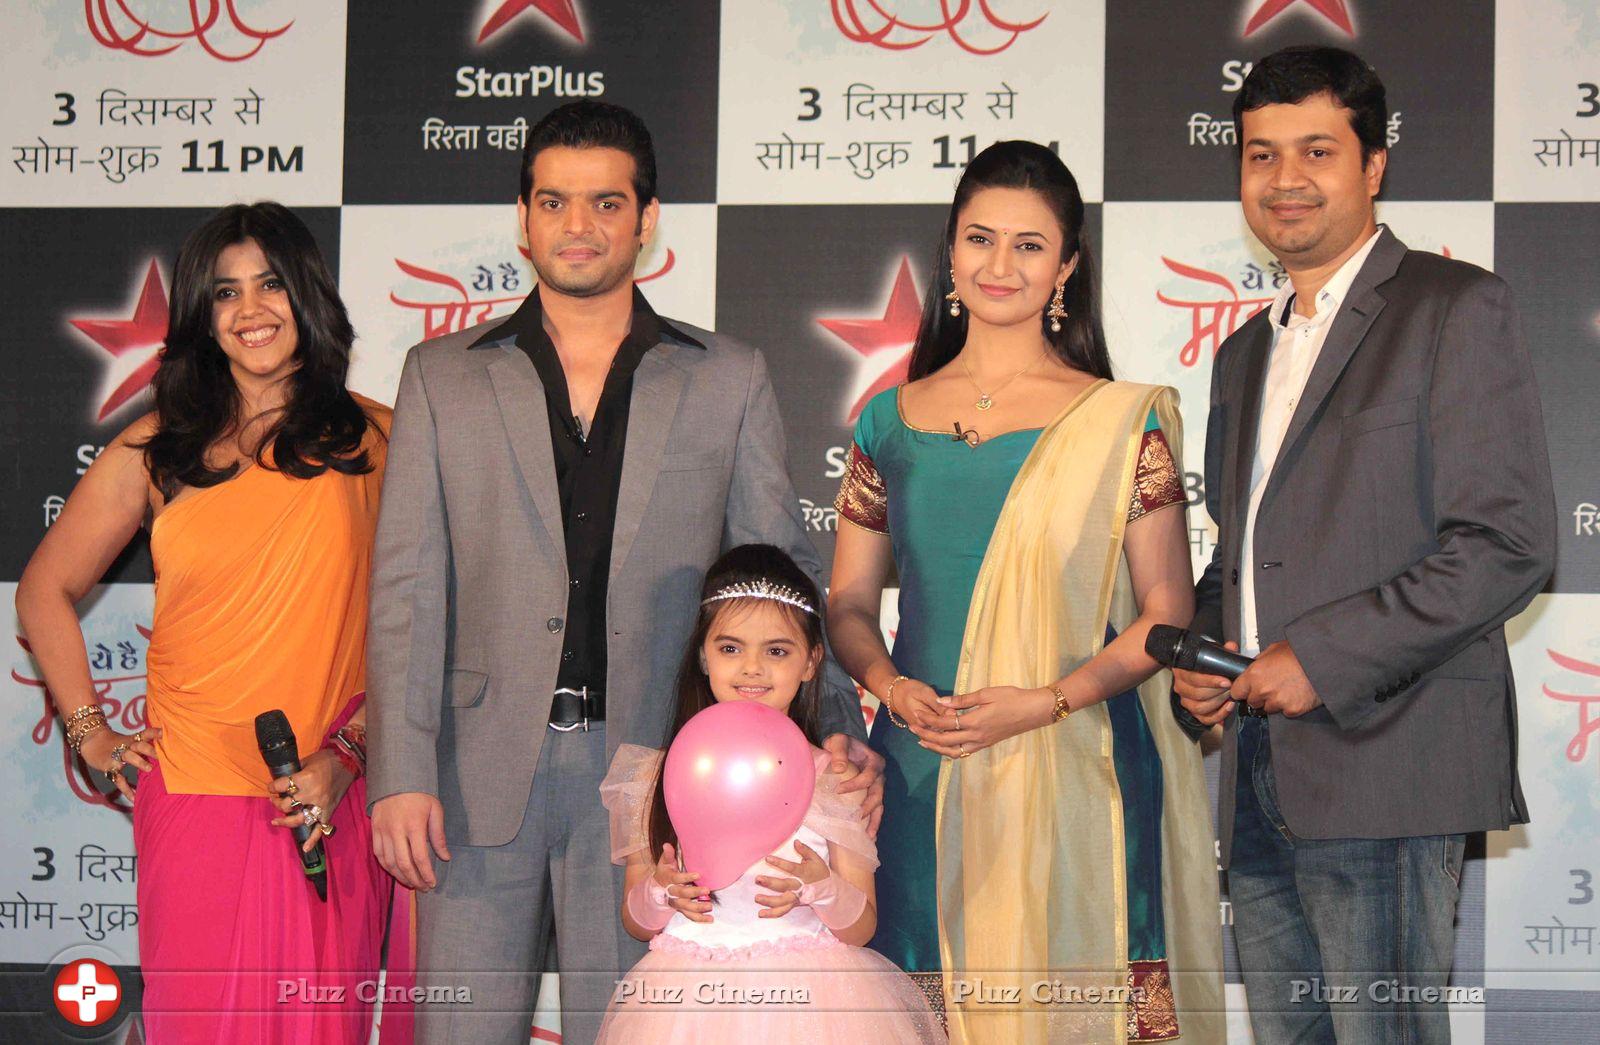 Launch of television serial Yeh Hai Mohabbatein Photos | Picture 647923